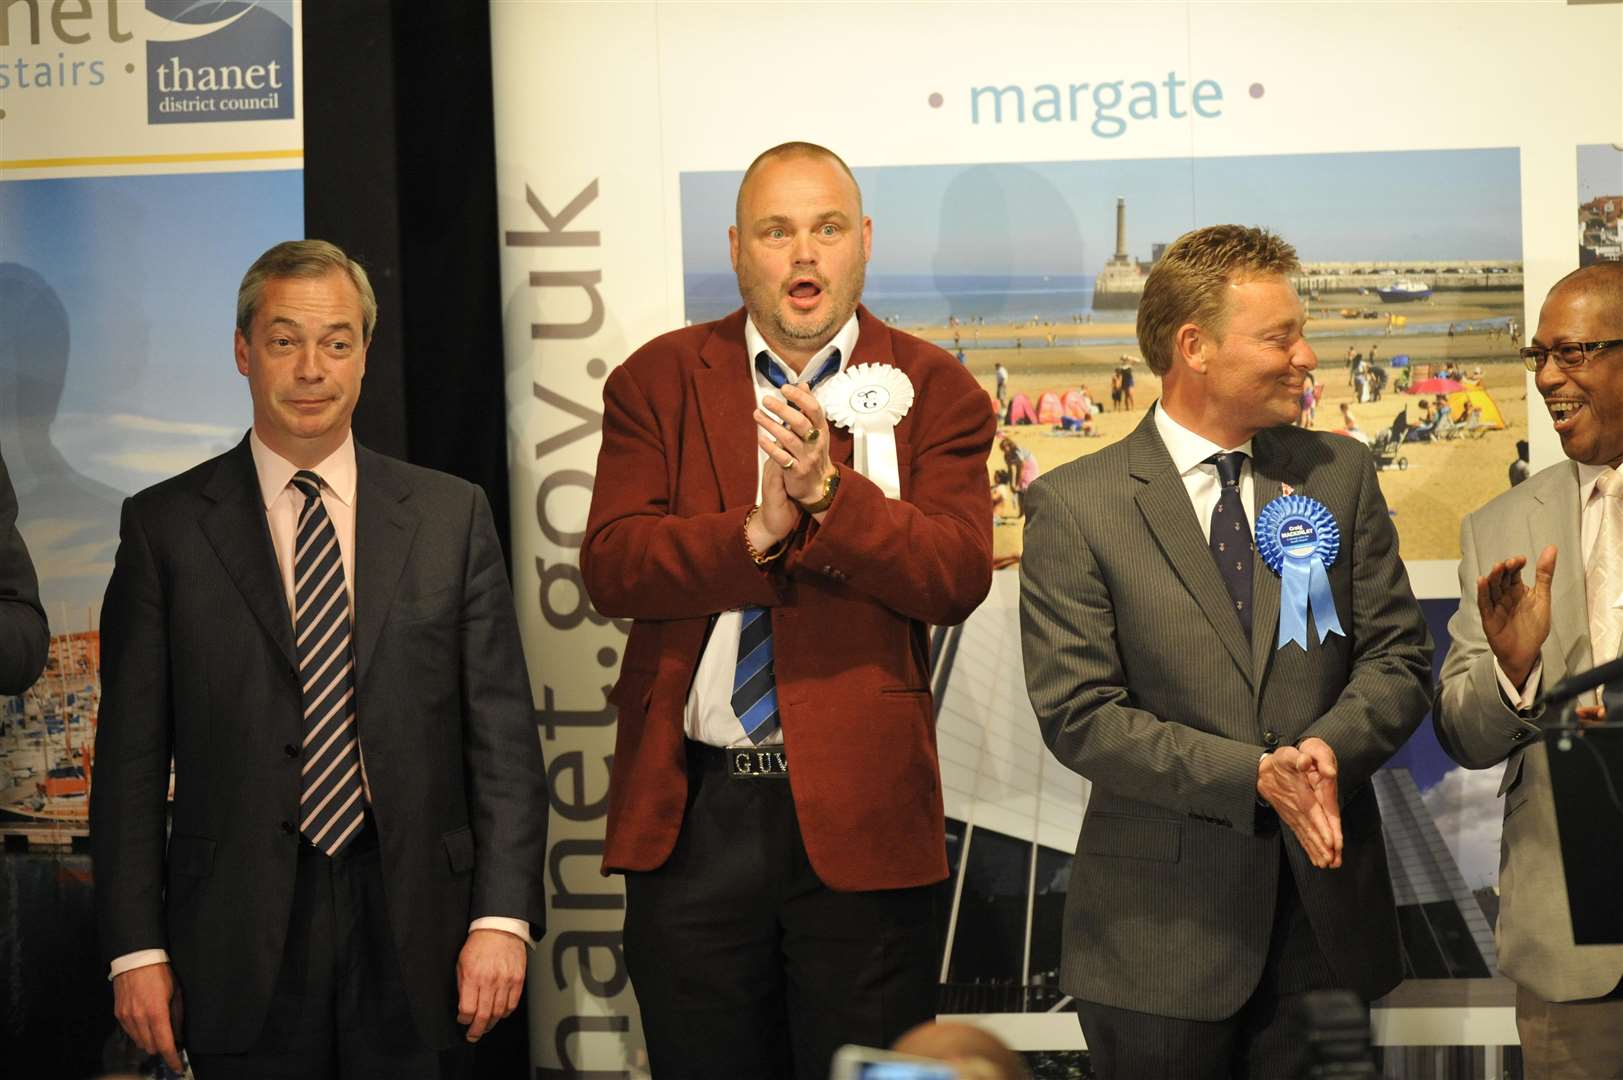 Nigel Farage lost out to Craig Mackinlay for the Thanet South seat at the 2015 General Election